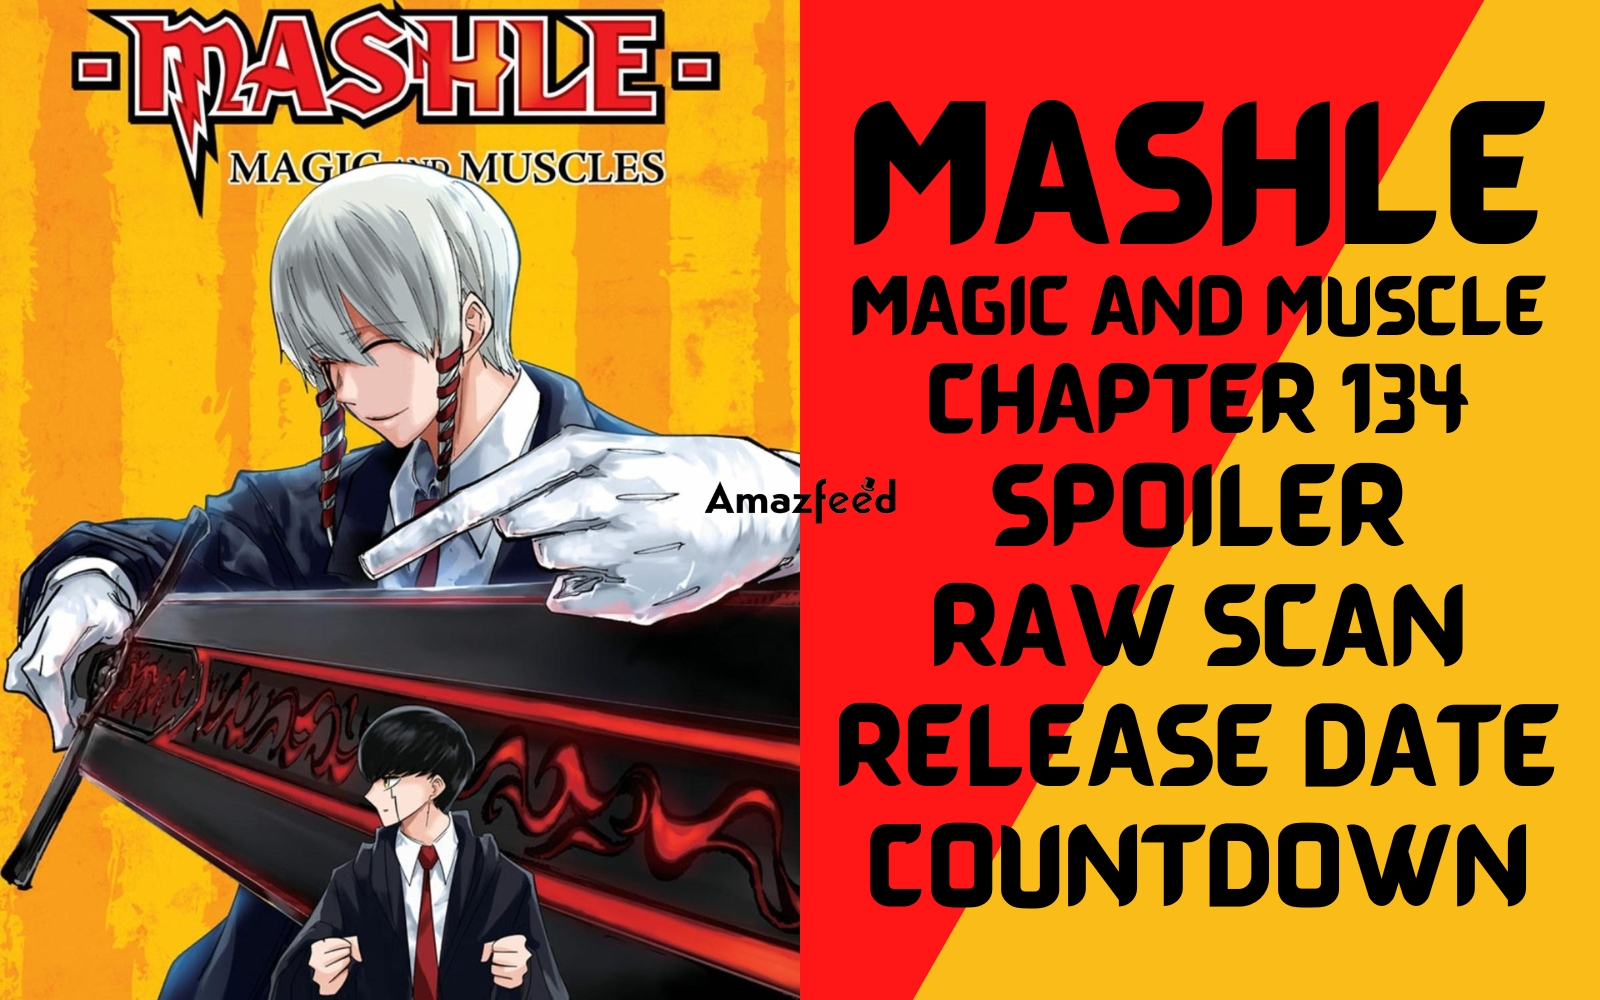 Mashle Magic And Muscle Chapter 134 Spoiler, Raw Scan, Color Page, Release Date